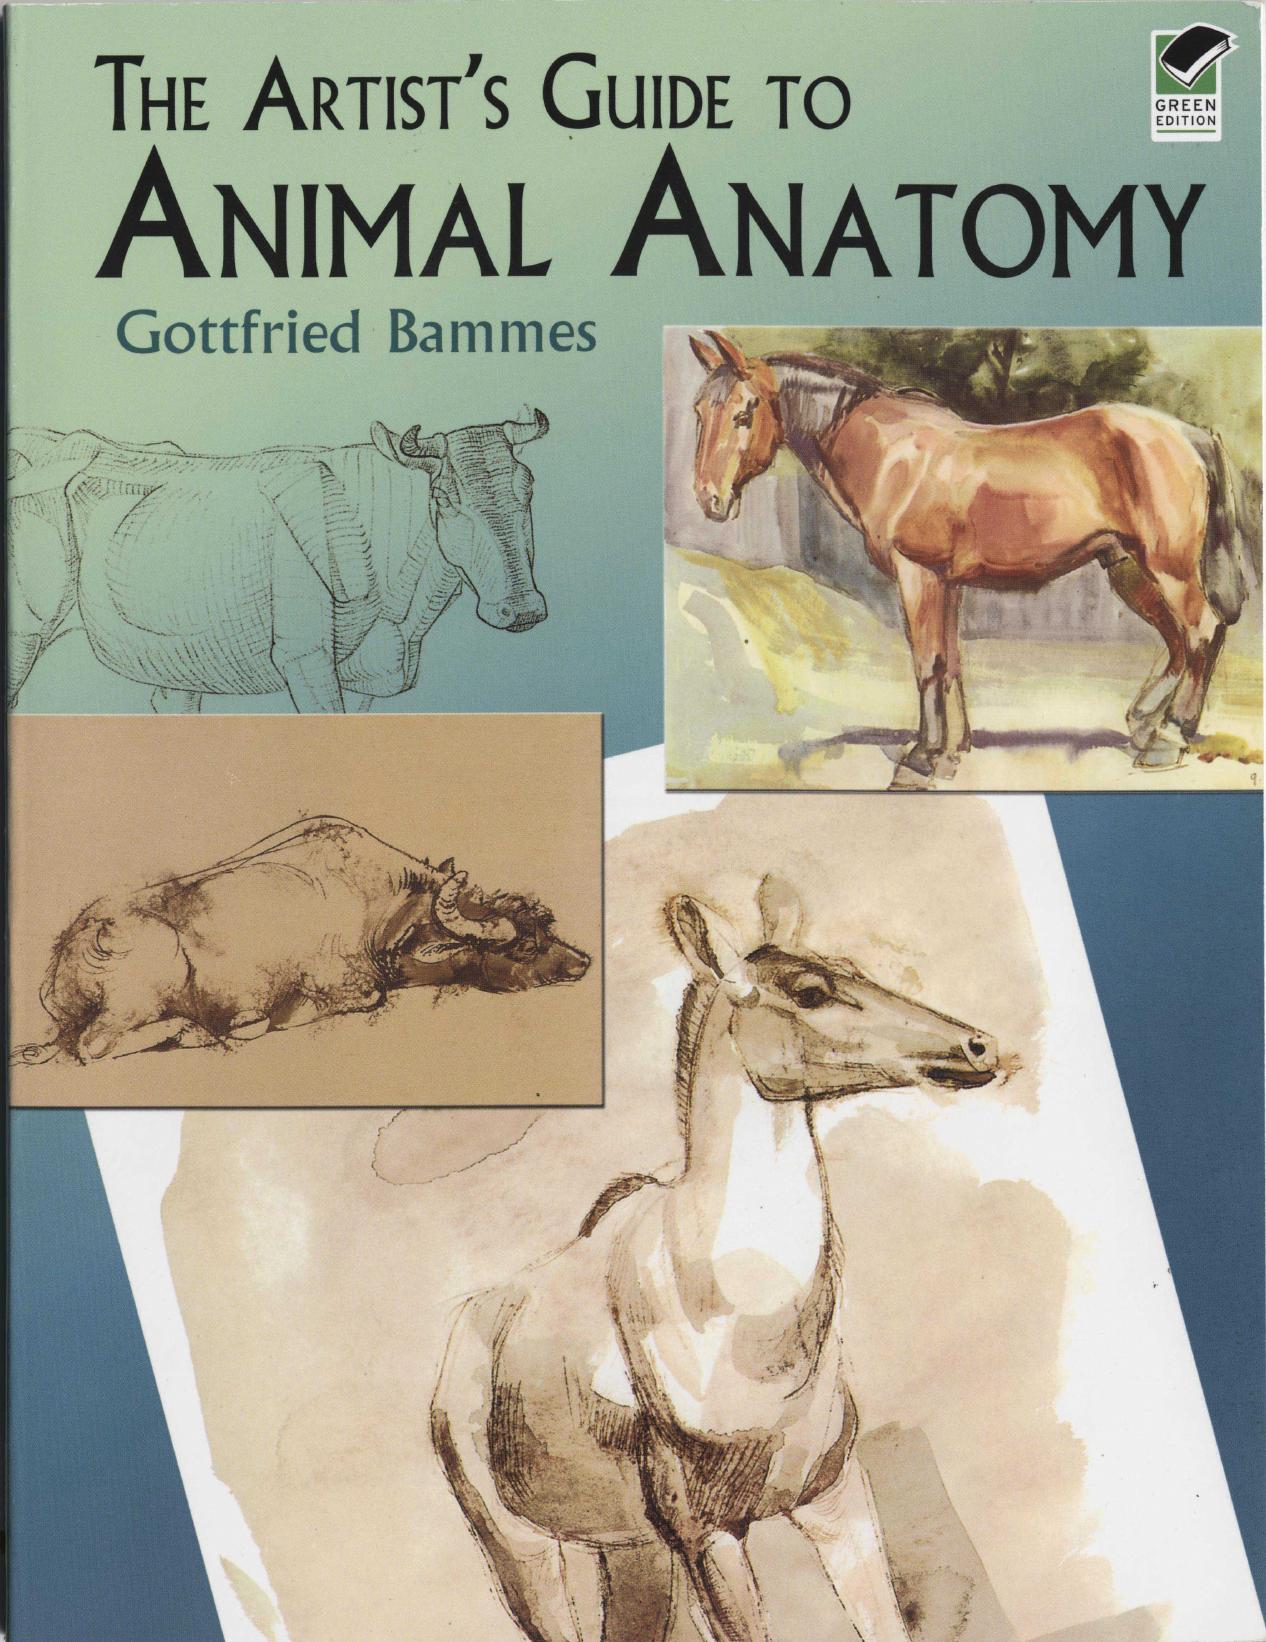 The artists guide to animal anatomy by Gottfried Bammes 2004